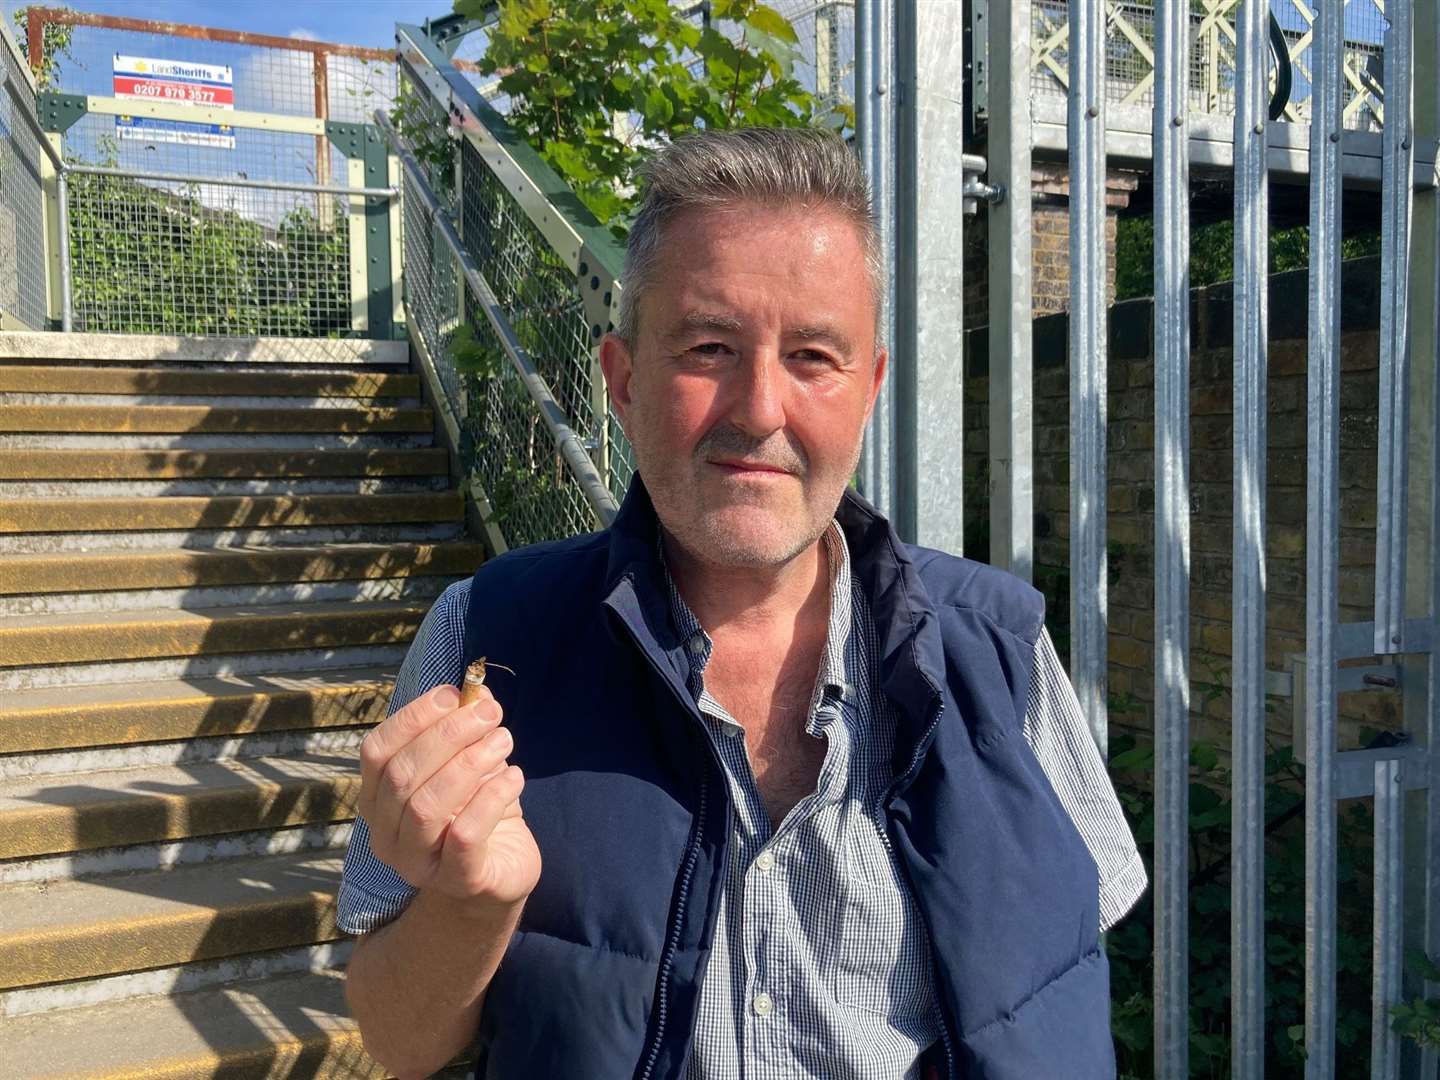 Giles Klech, 51, was fined for dropping a cigarette butt in Station Road, Faversham